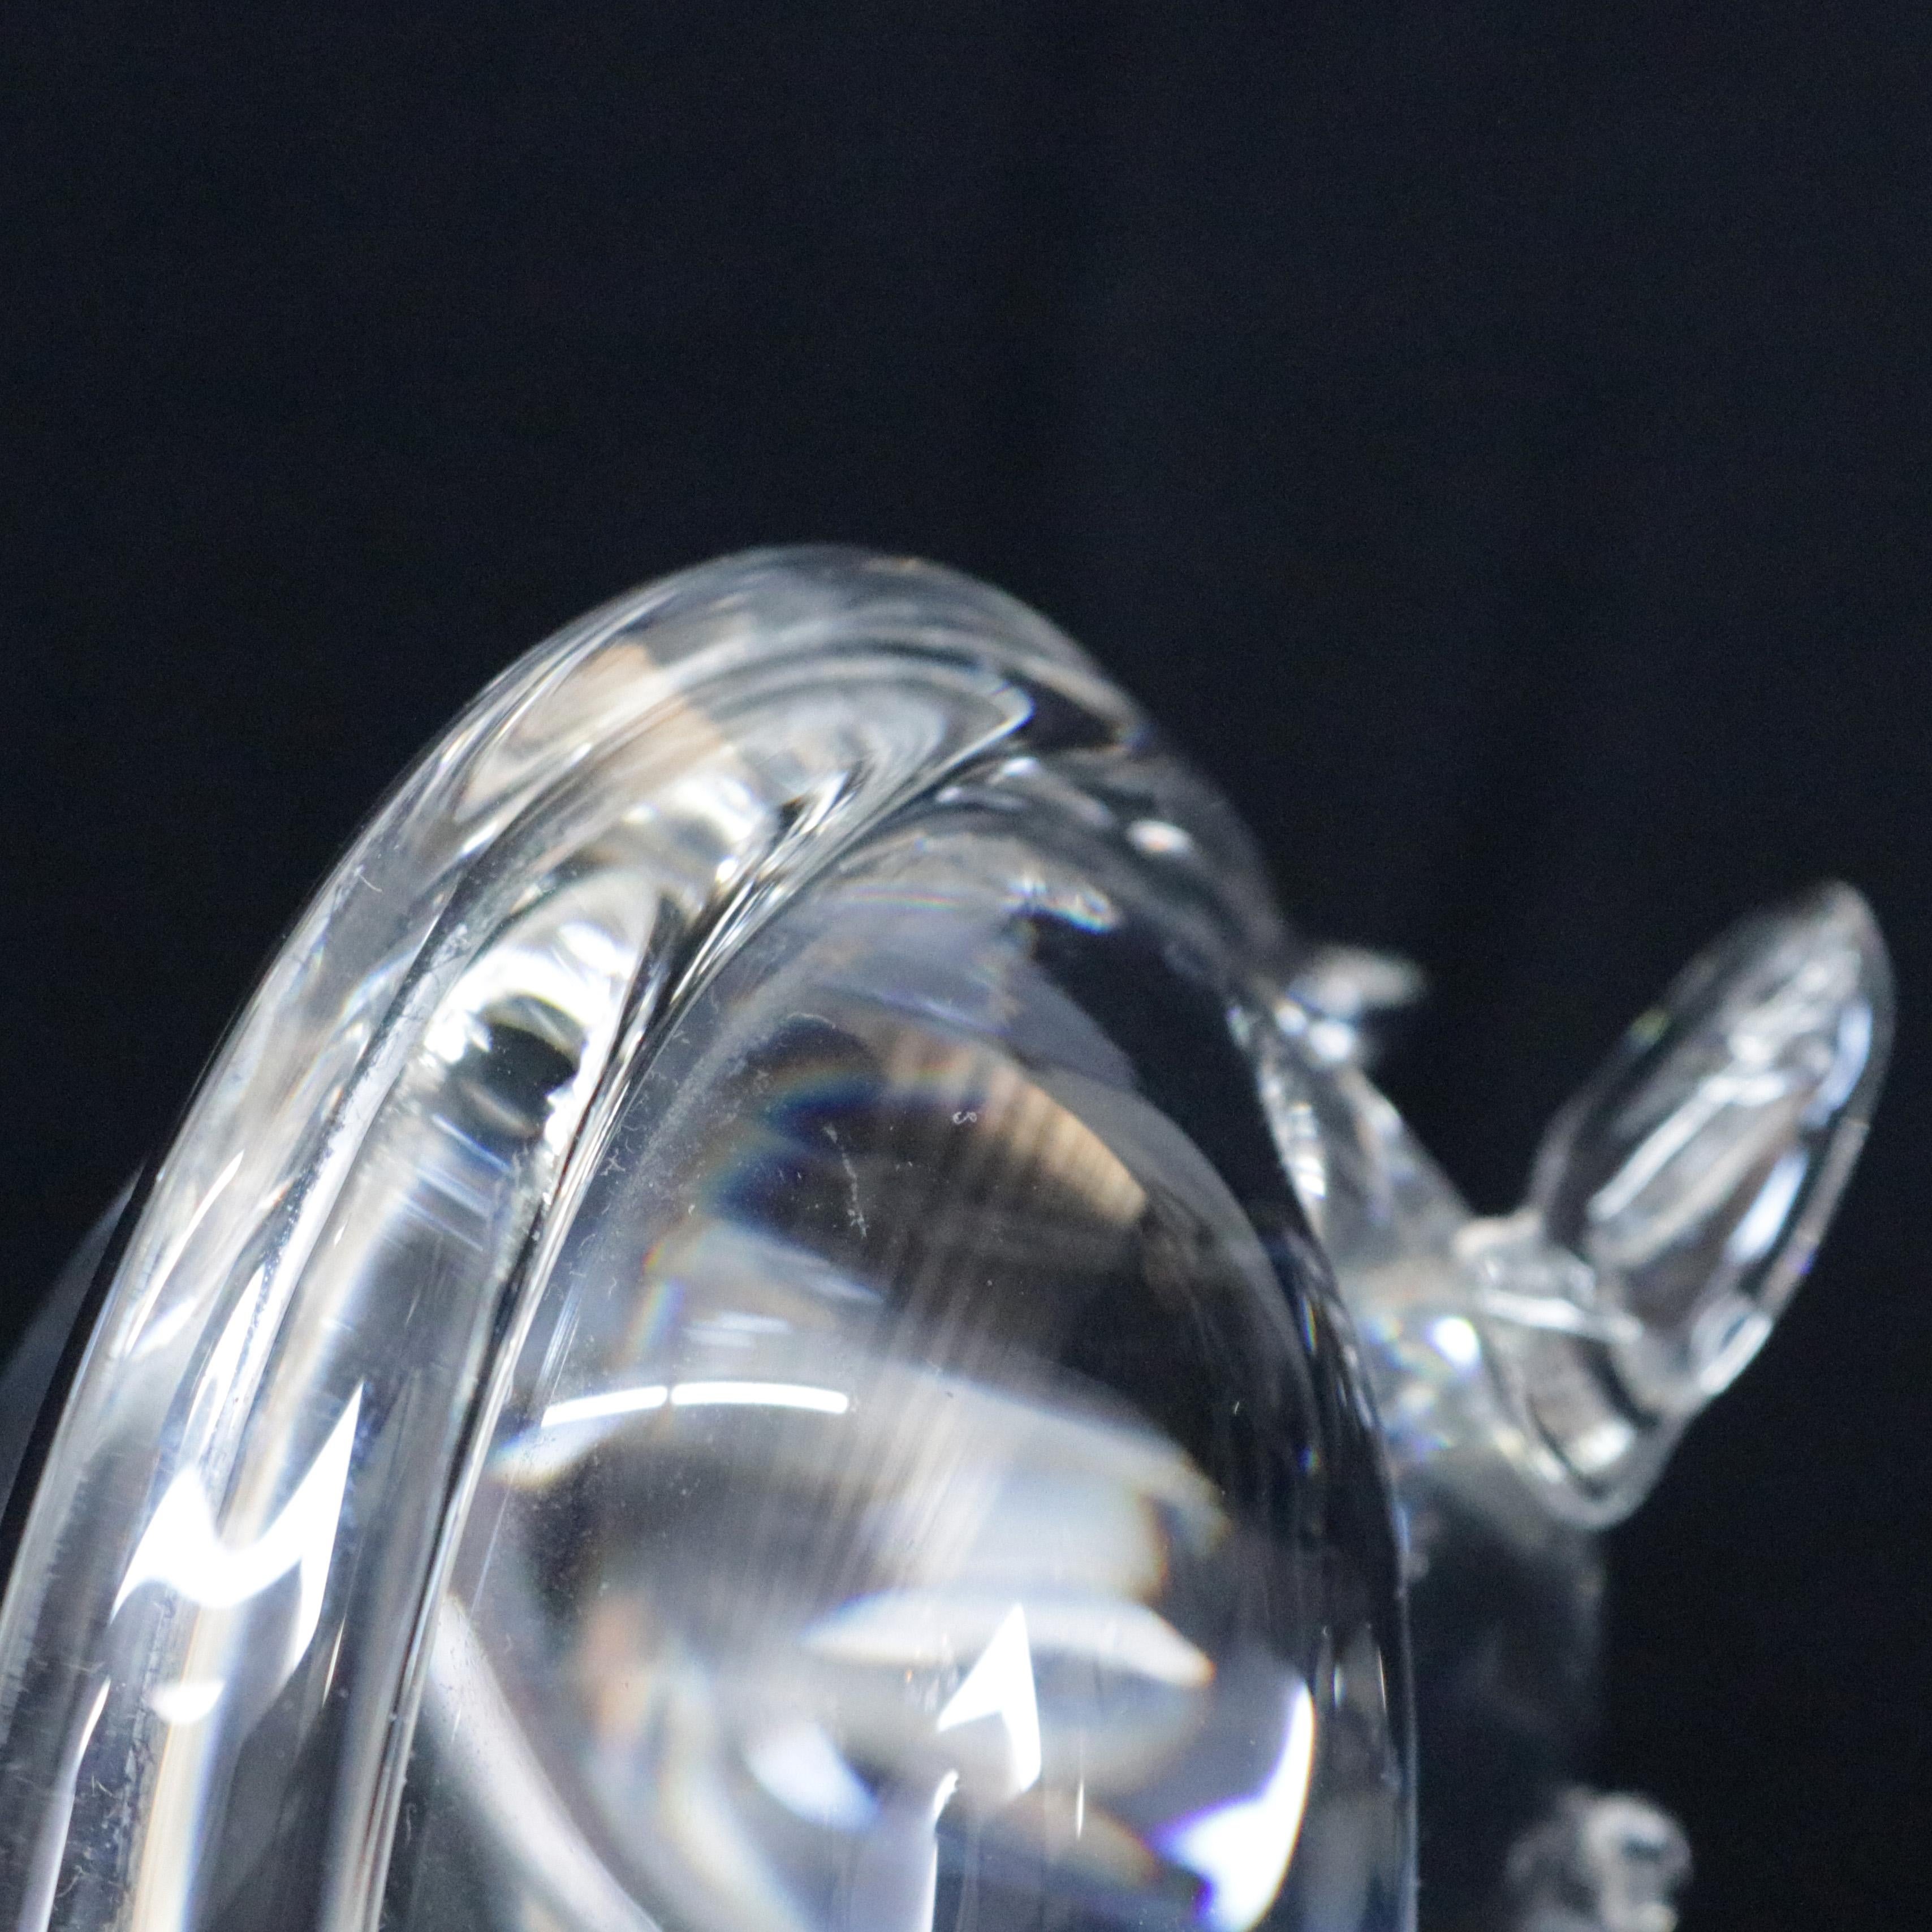 Hand-Crafted Steuben Figurative Crystal Sculpture Horse Head Paperweight by Dowler, Signed